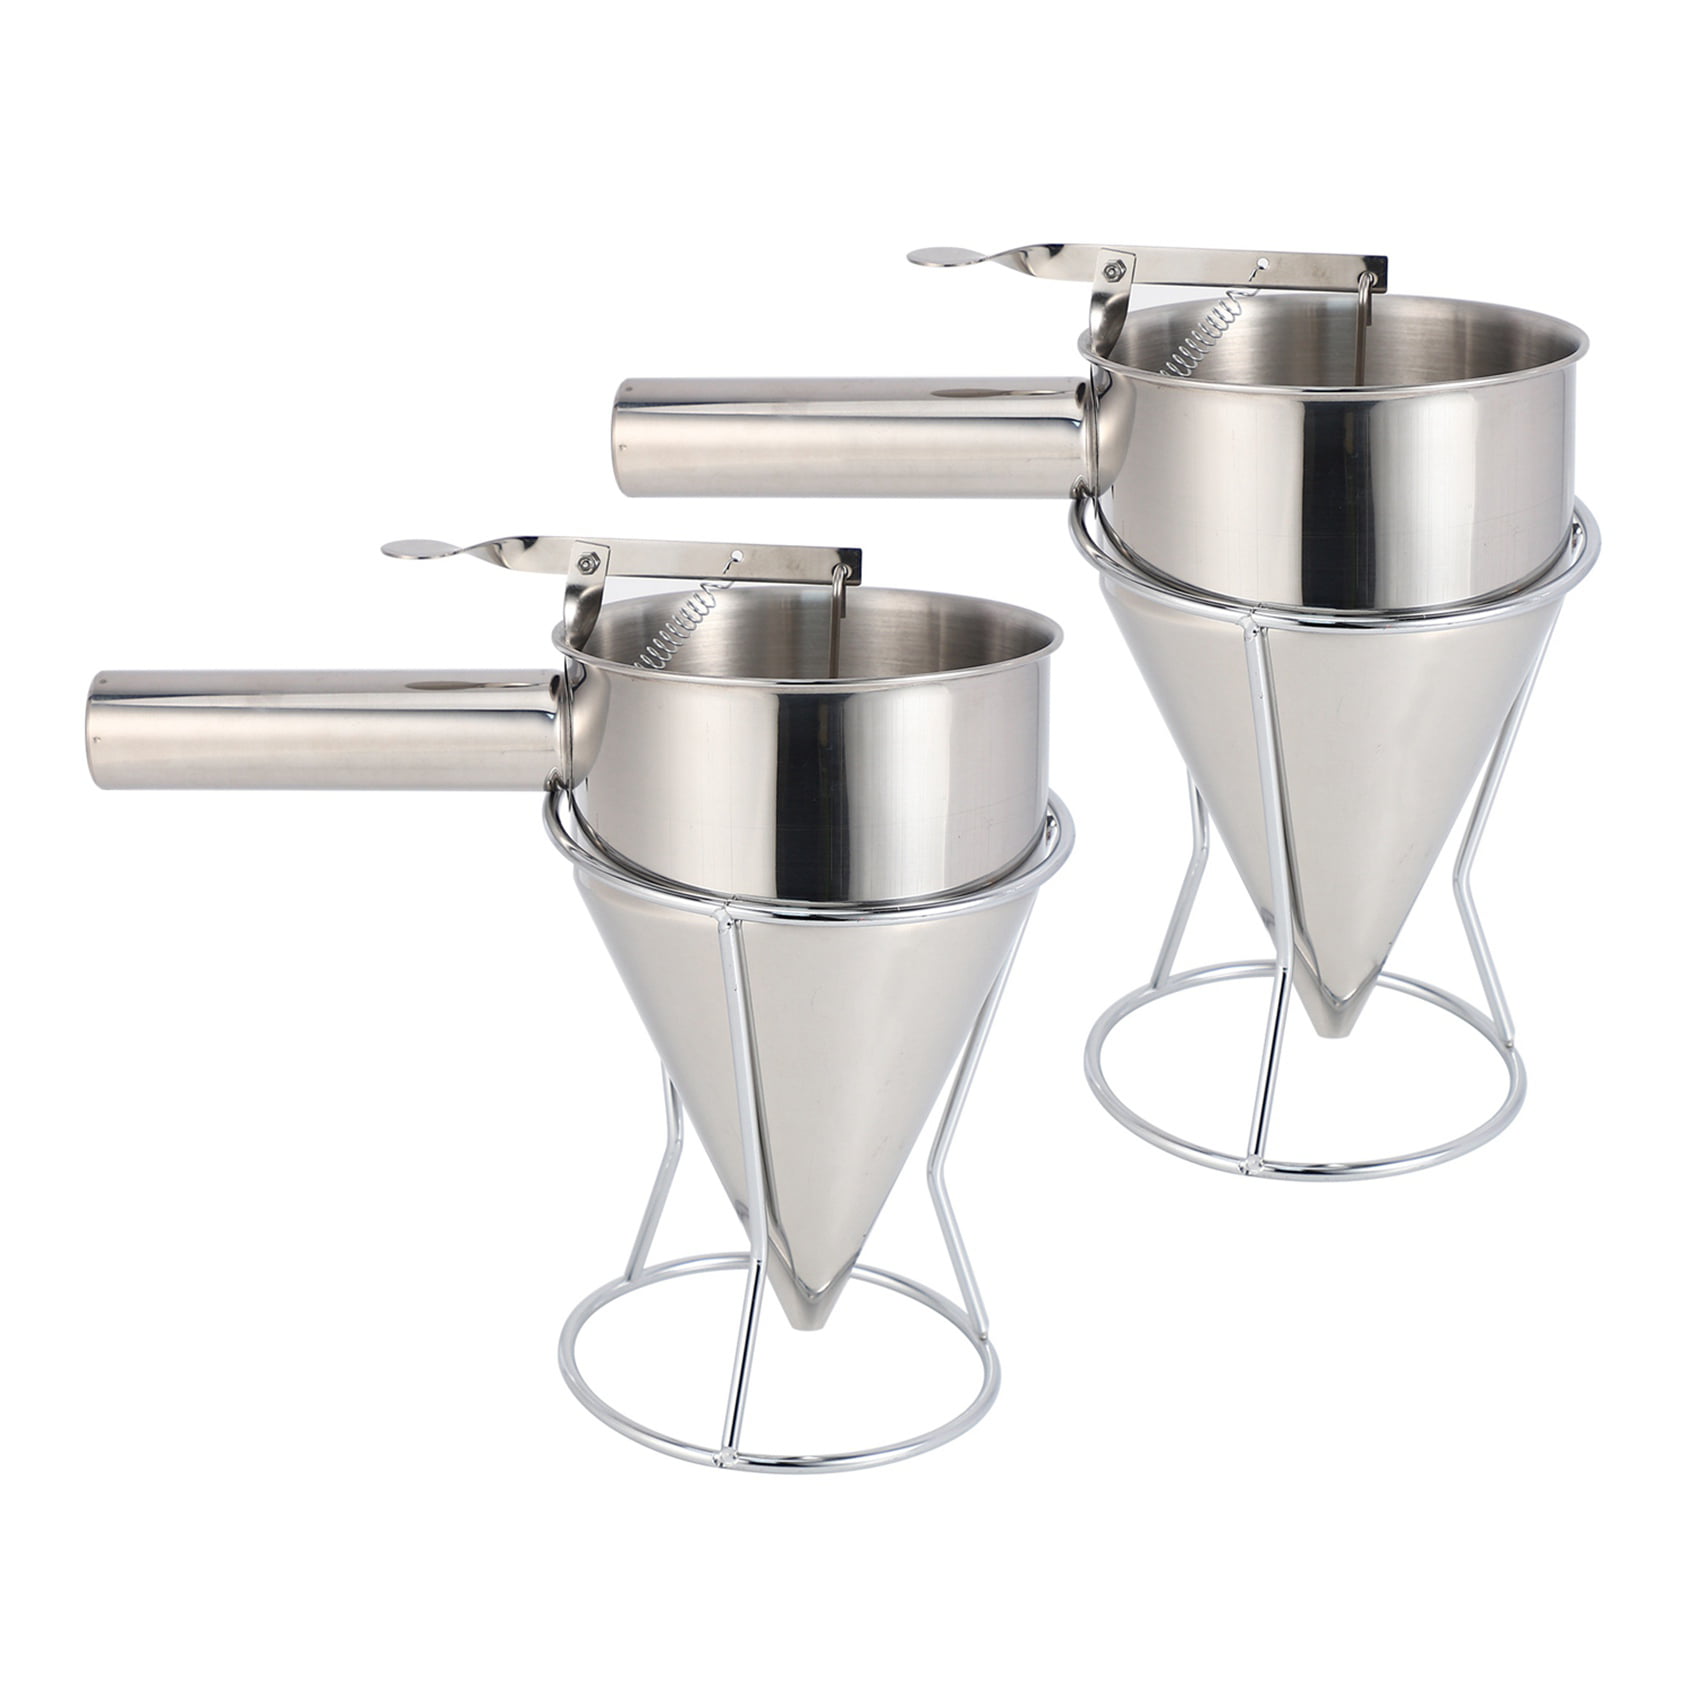 Tashido Stainless Steel Piston Funnel with Support for Sauce Cream Dosing Funnel for Sauce 